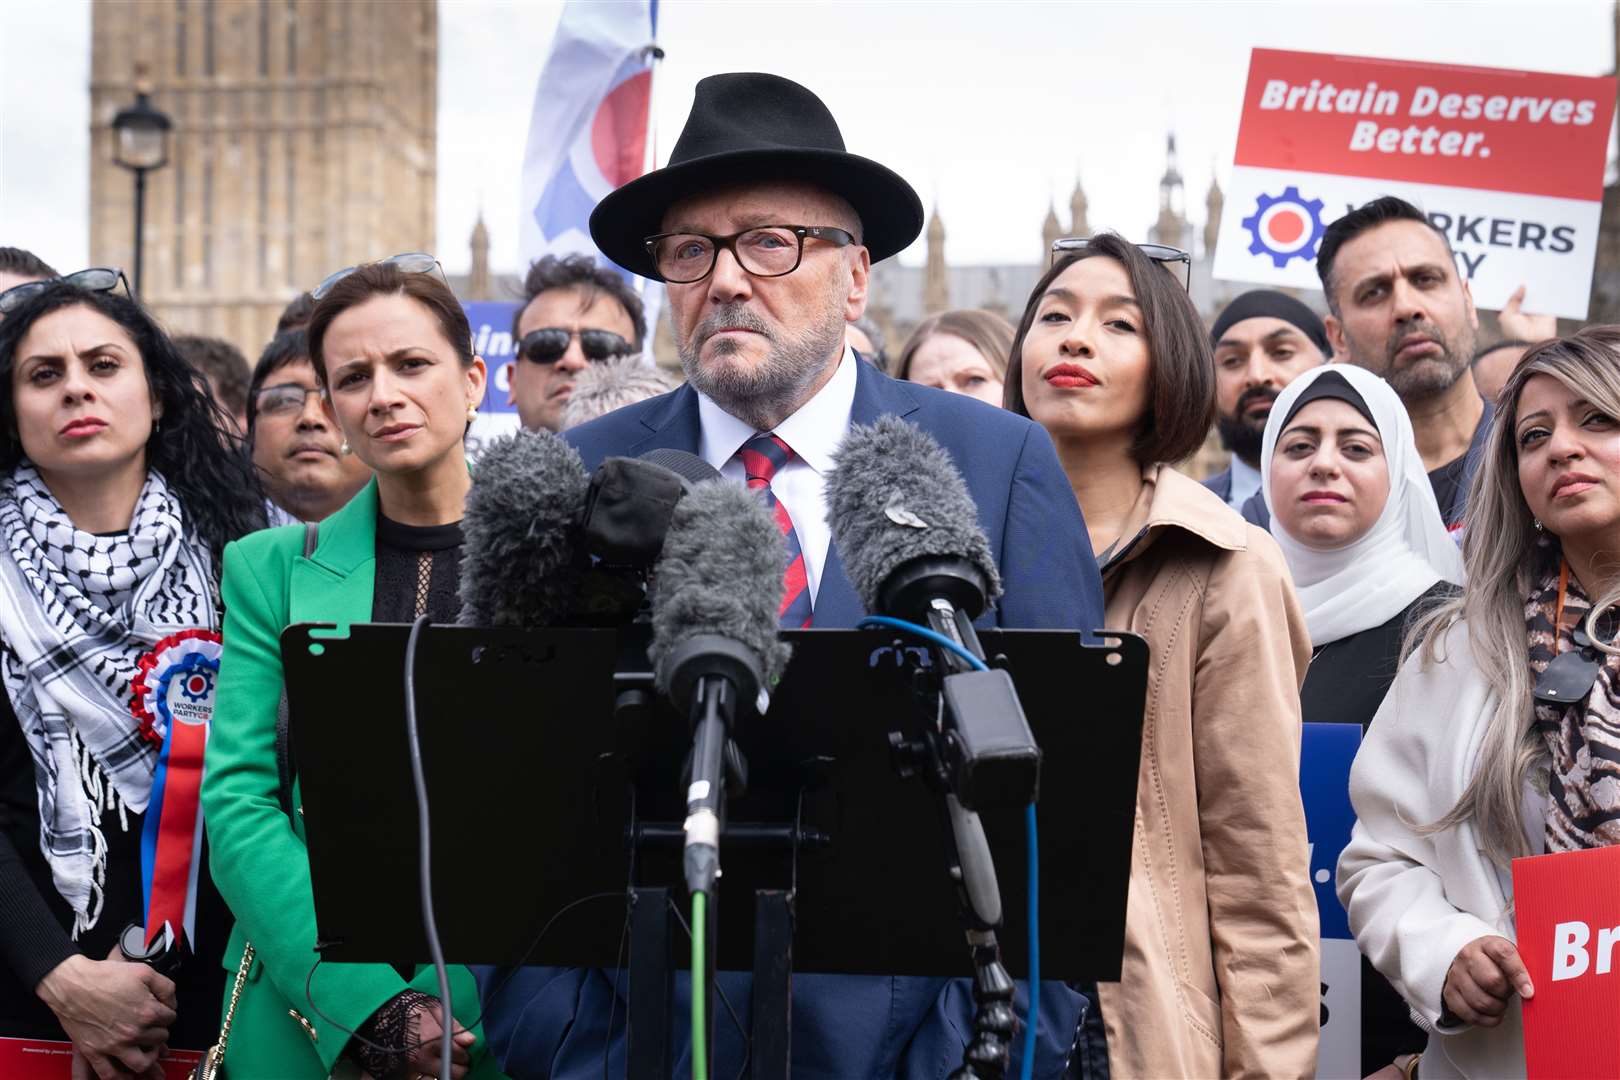 Workers Party of Britain leader George Galloway (Stefan Rousseau/PA)